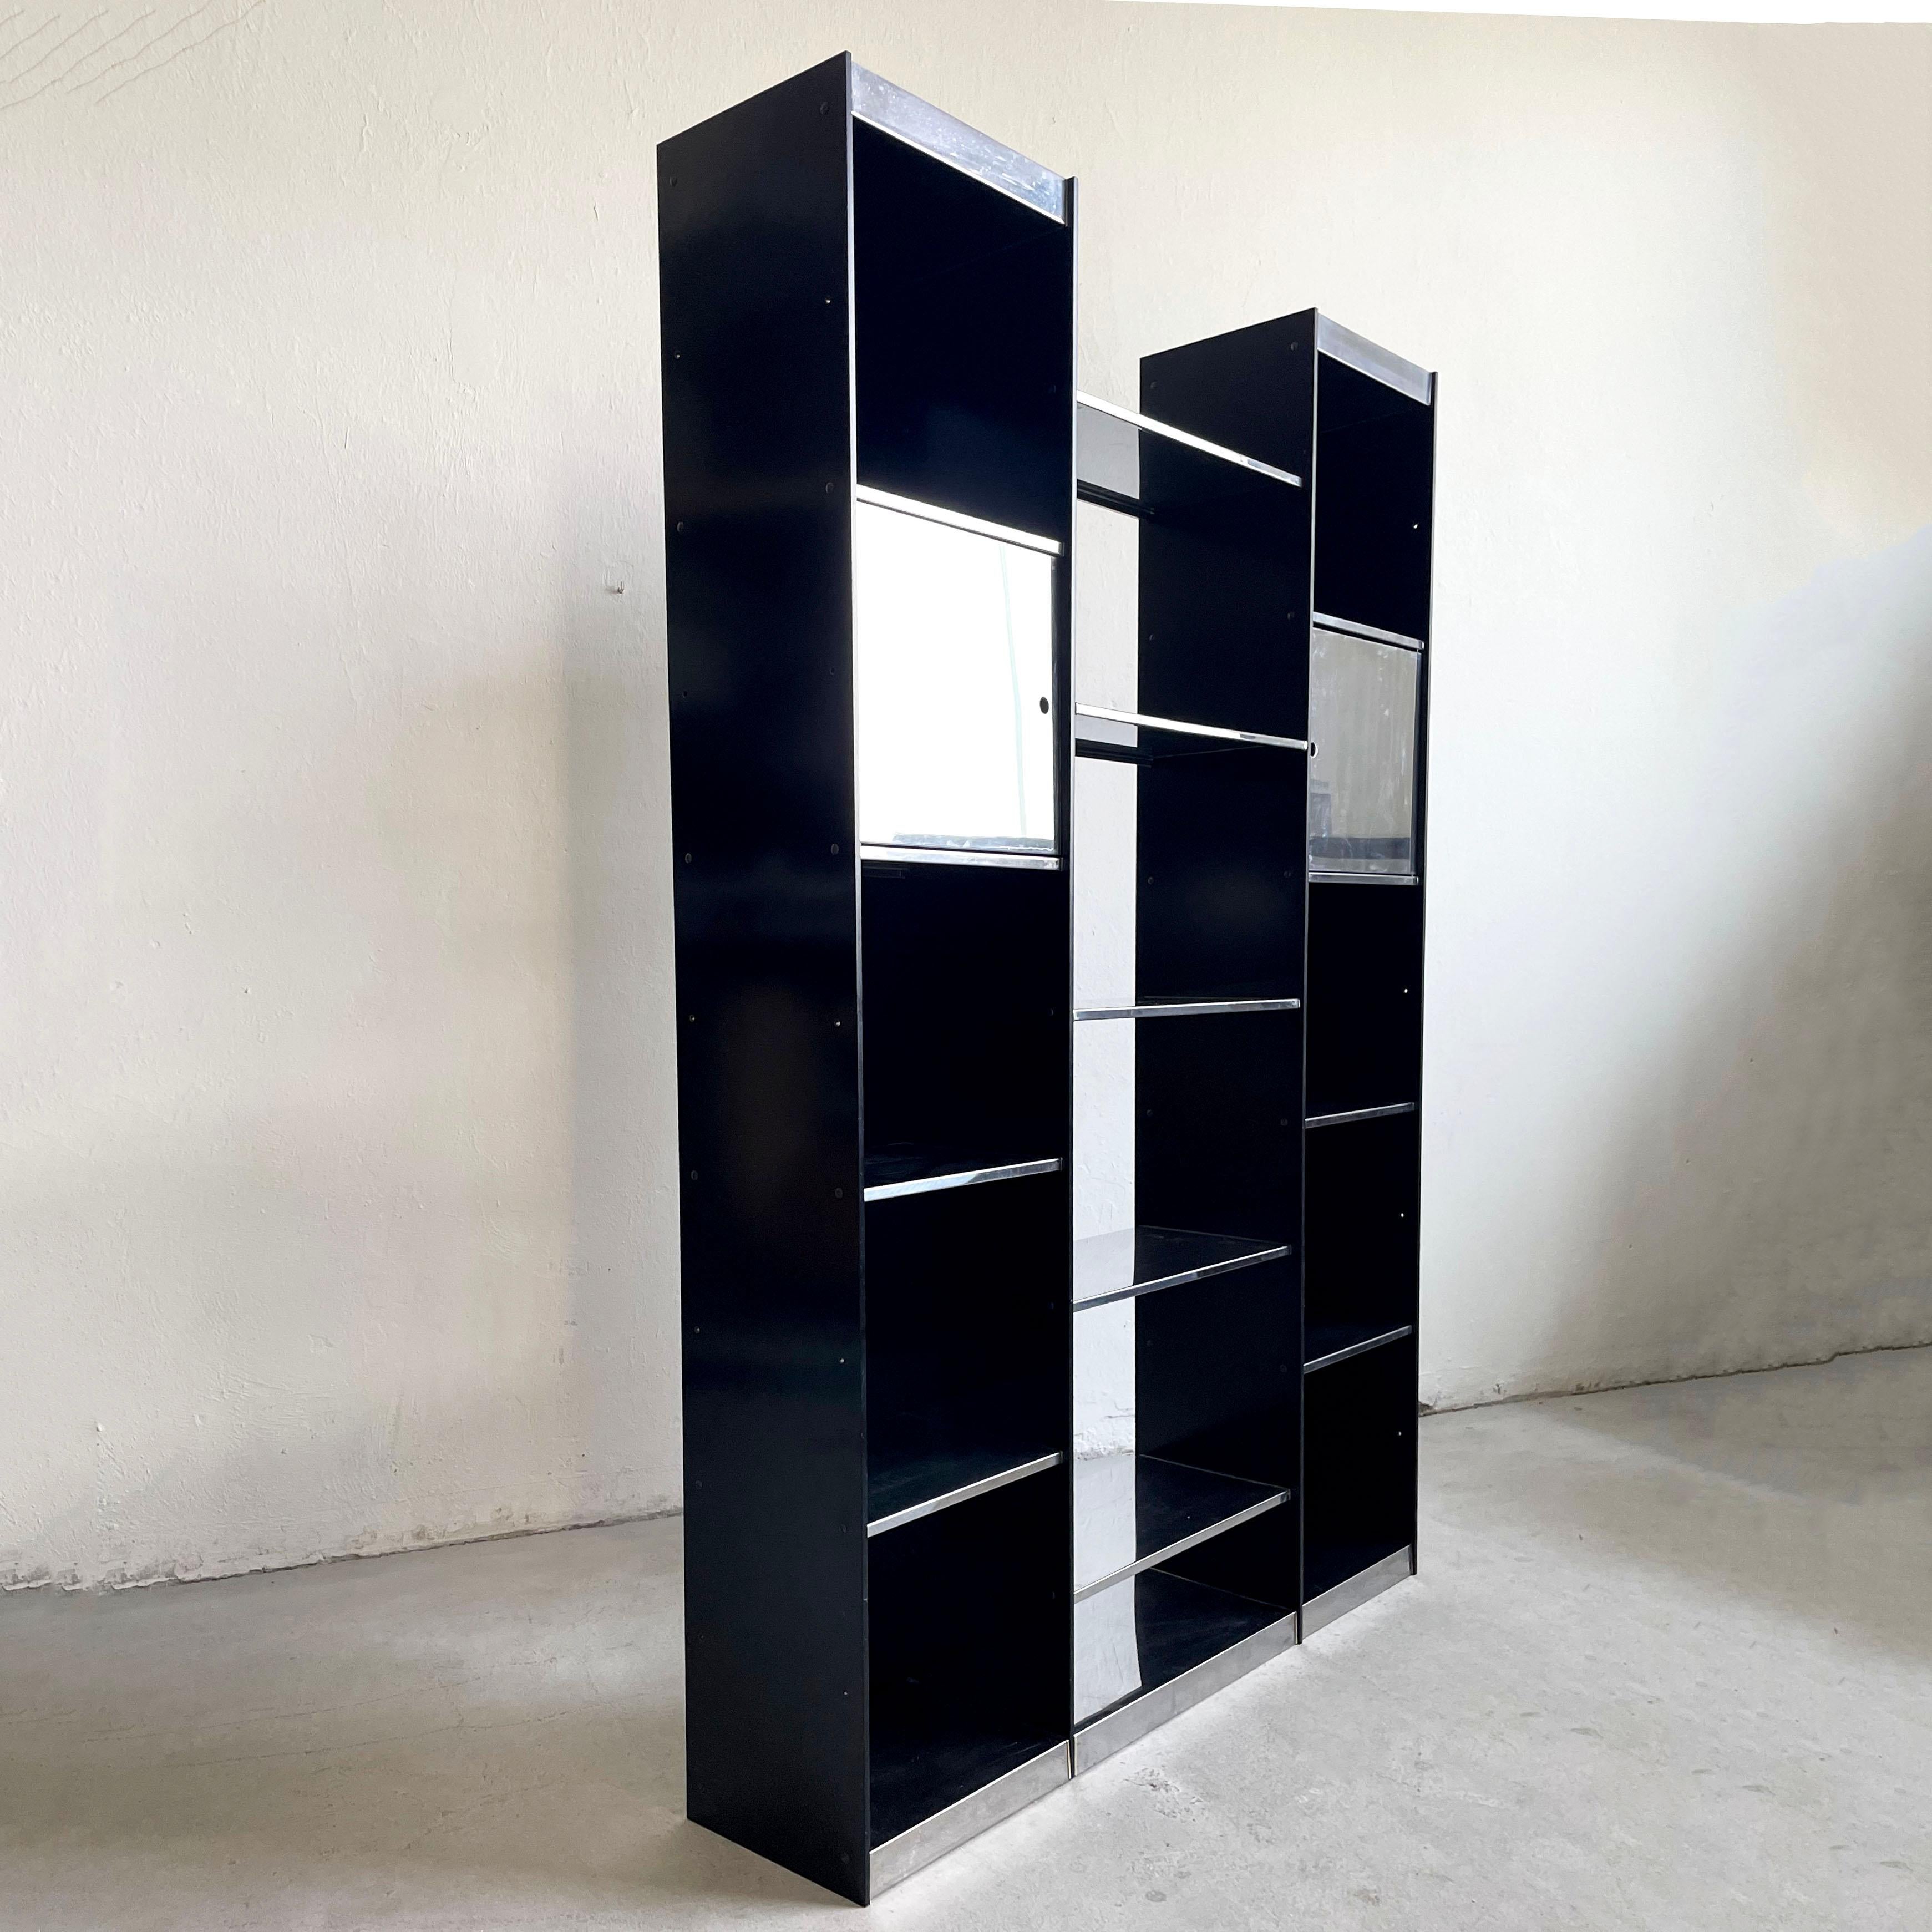 Lacquered Very Rare Italian Modern Library Bookcase by Willy Rizzo for Cidue, Italy, 1970 For Sale